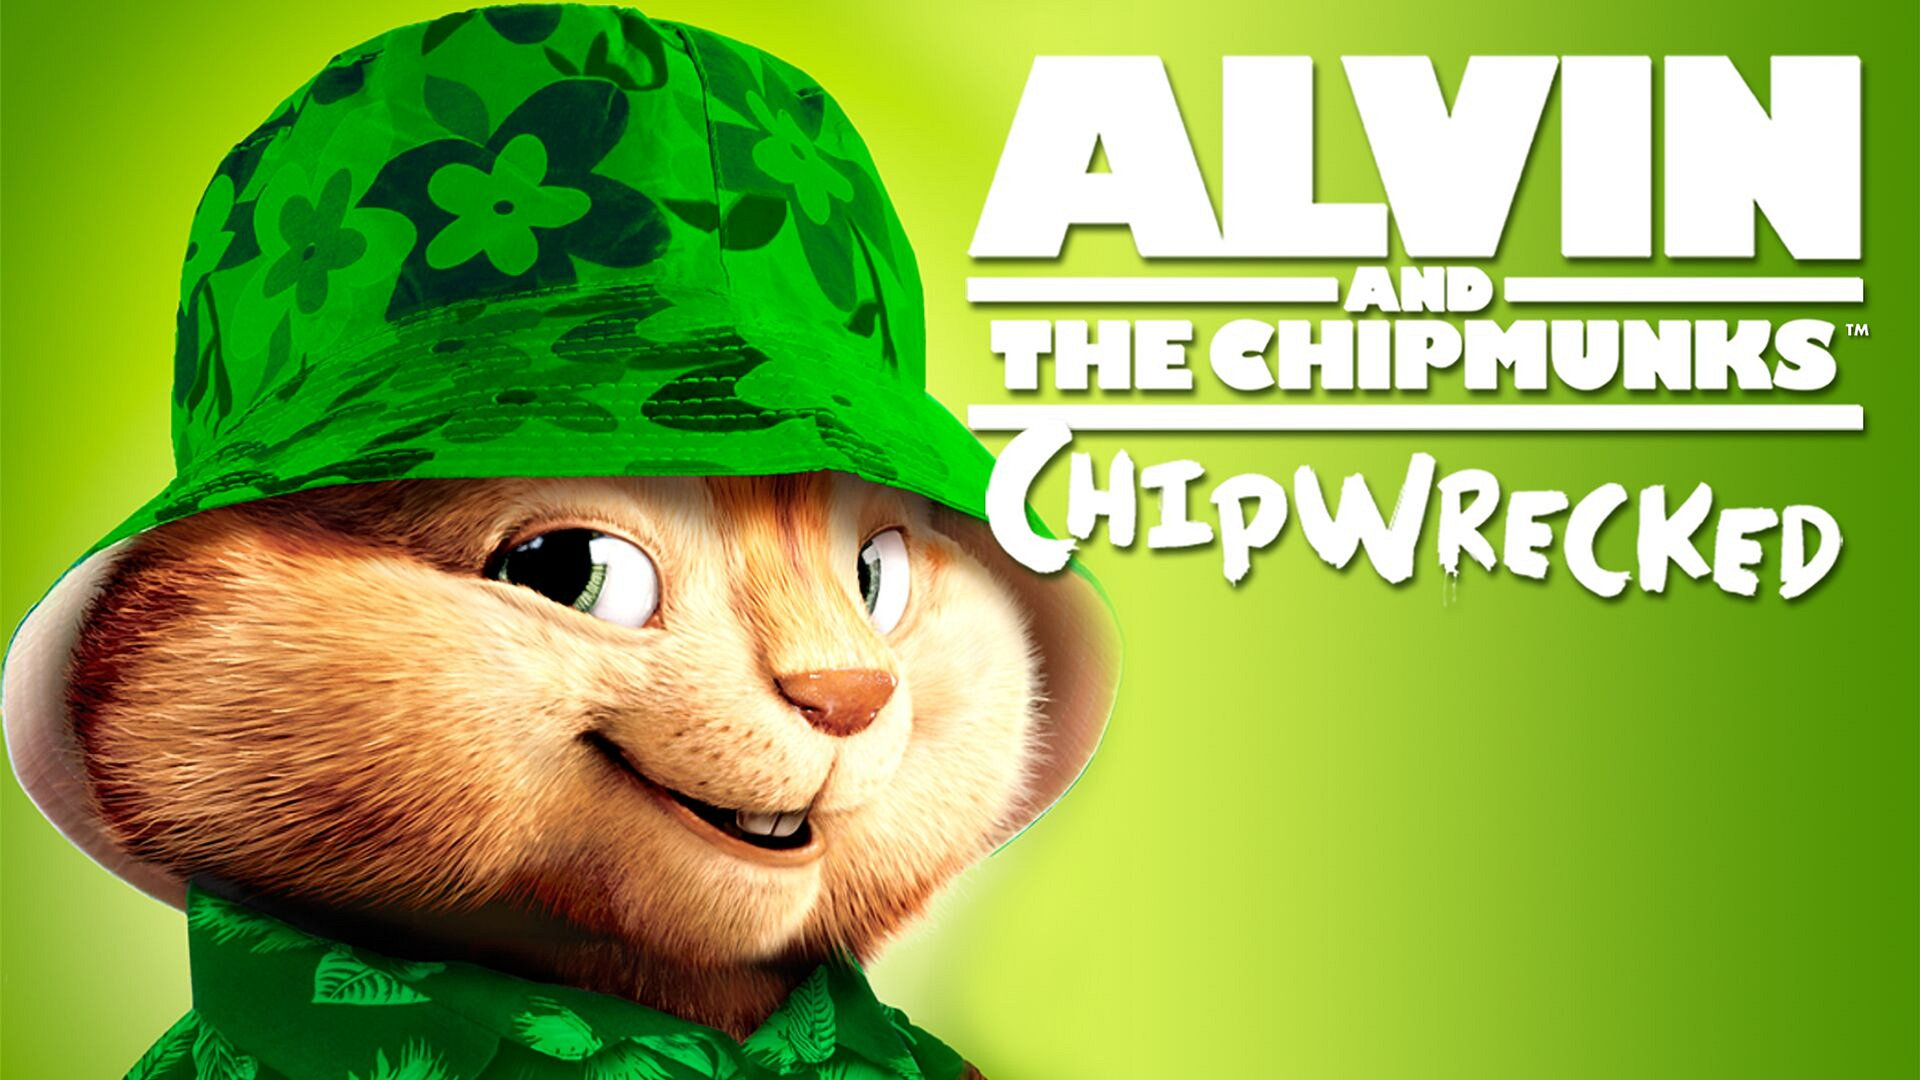 Alvin and the Chipmunks: Chipwrecked (Original tale)